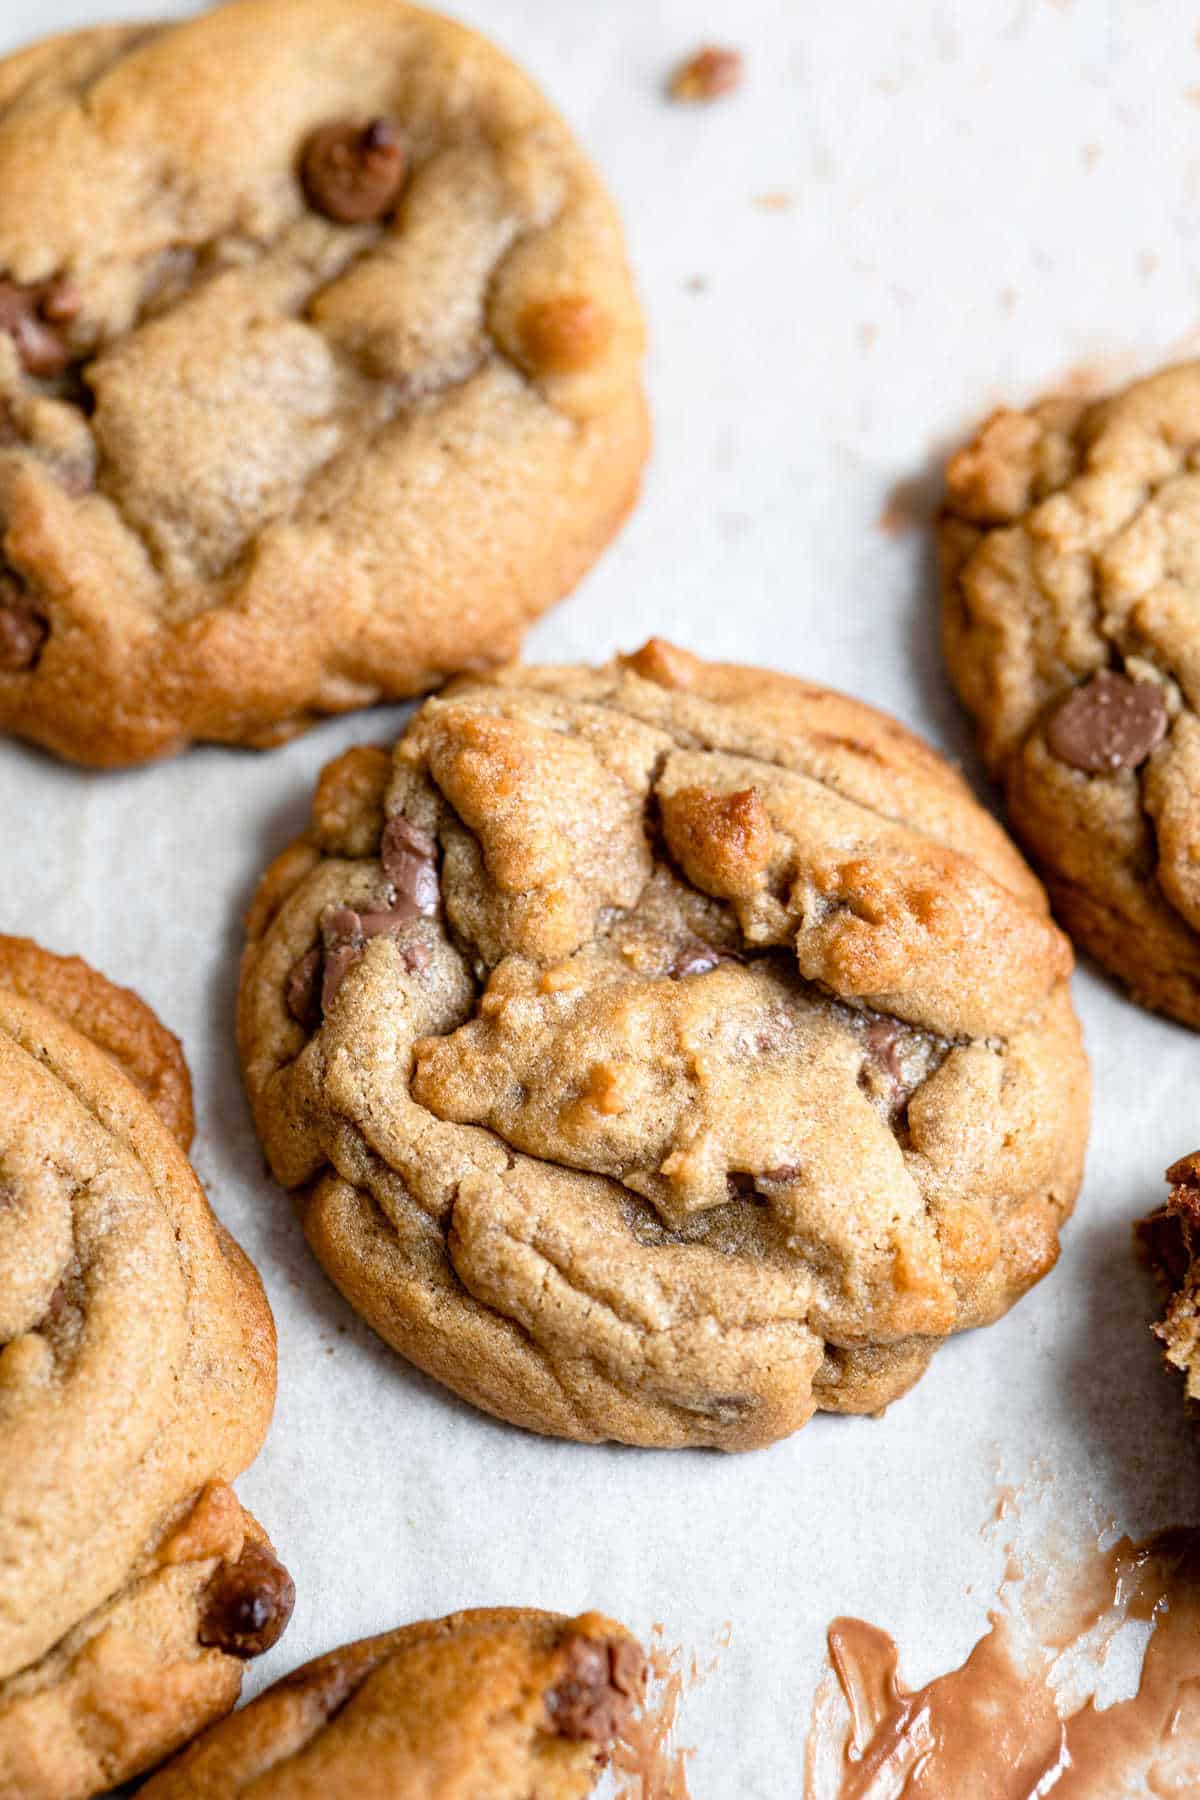 https://www.ihearteating.com/wp-content/uploads/2021/12/Chocolate-Chip-Cookies-15-of-17-1200.jpg